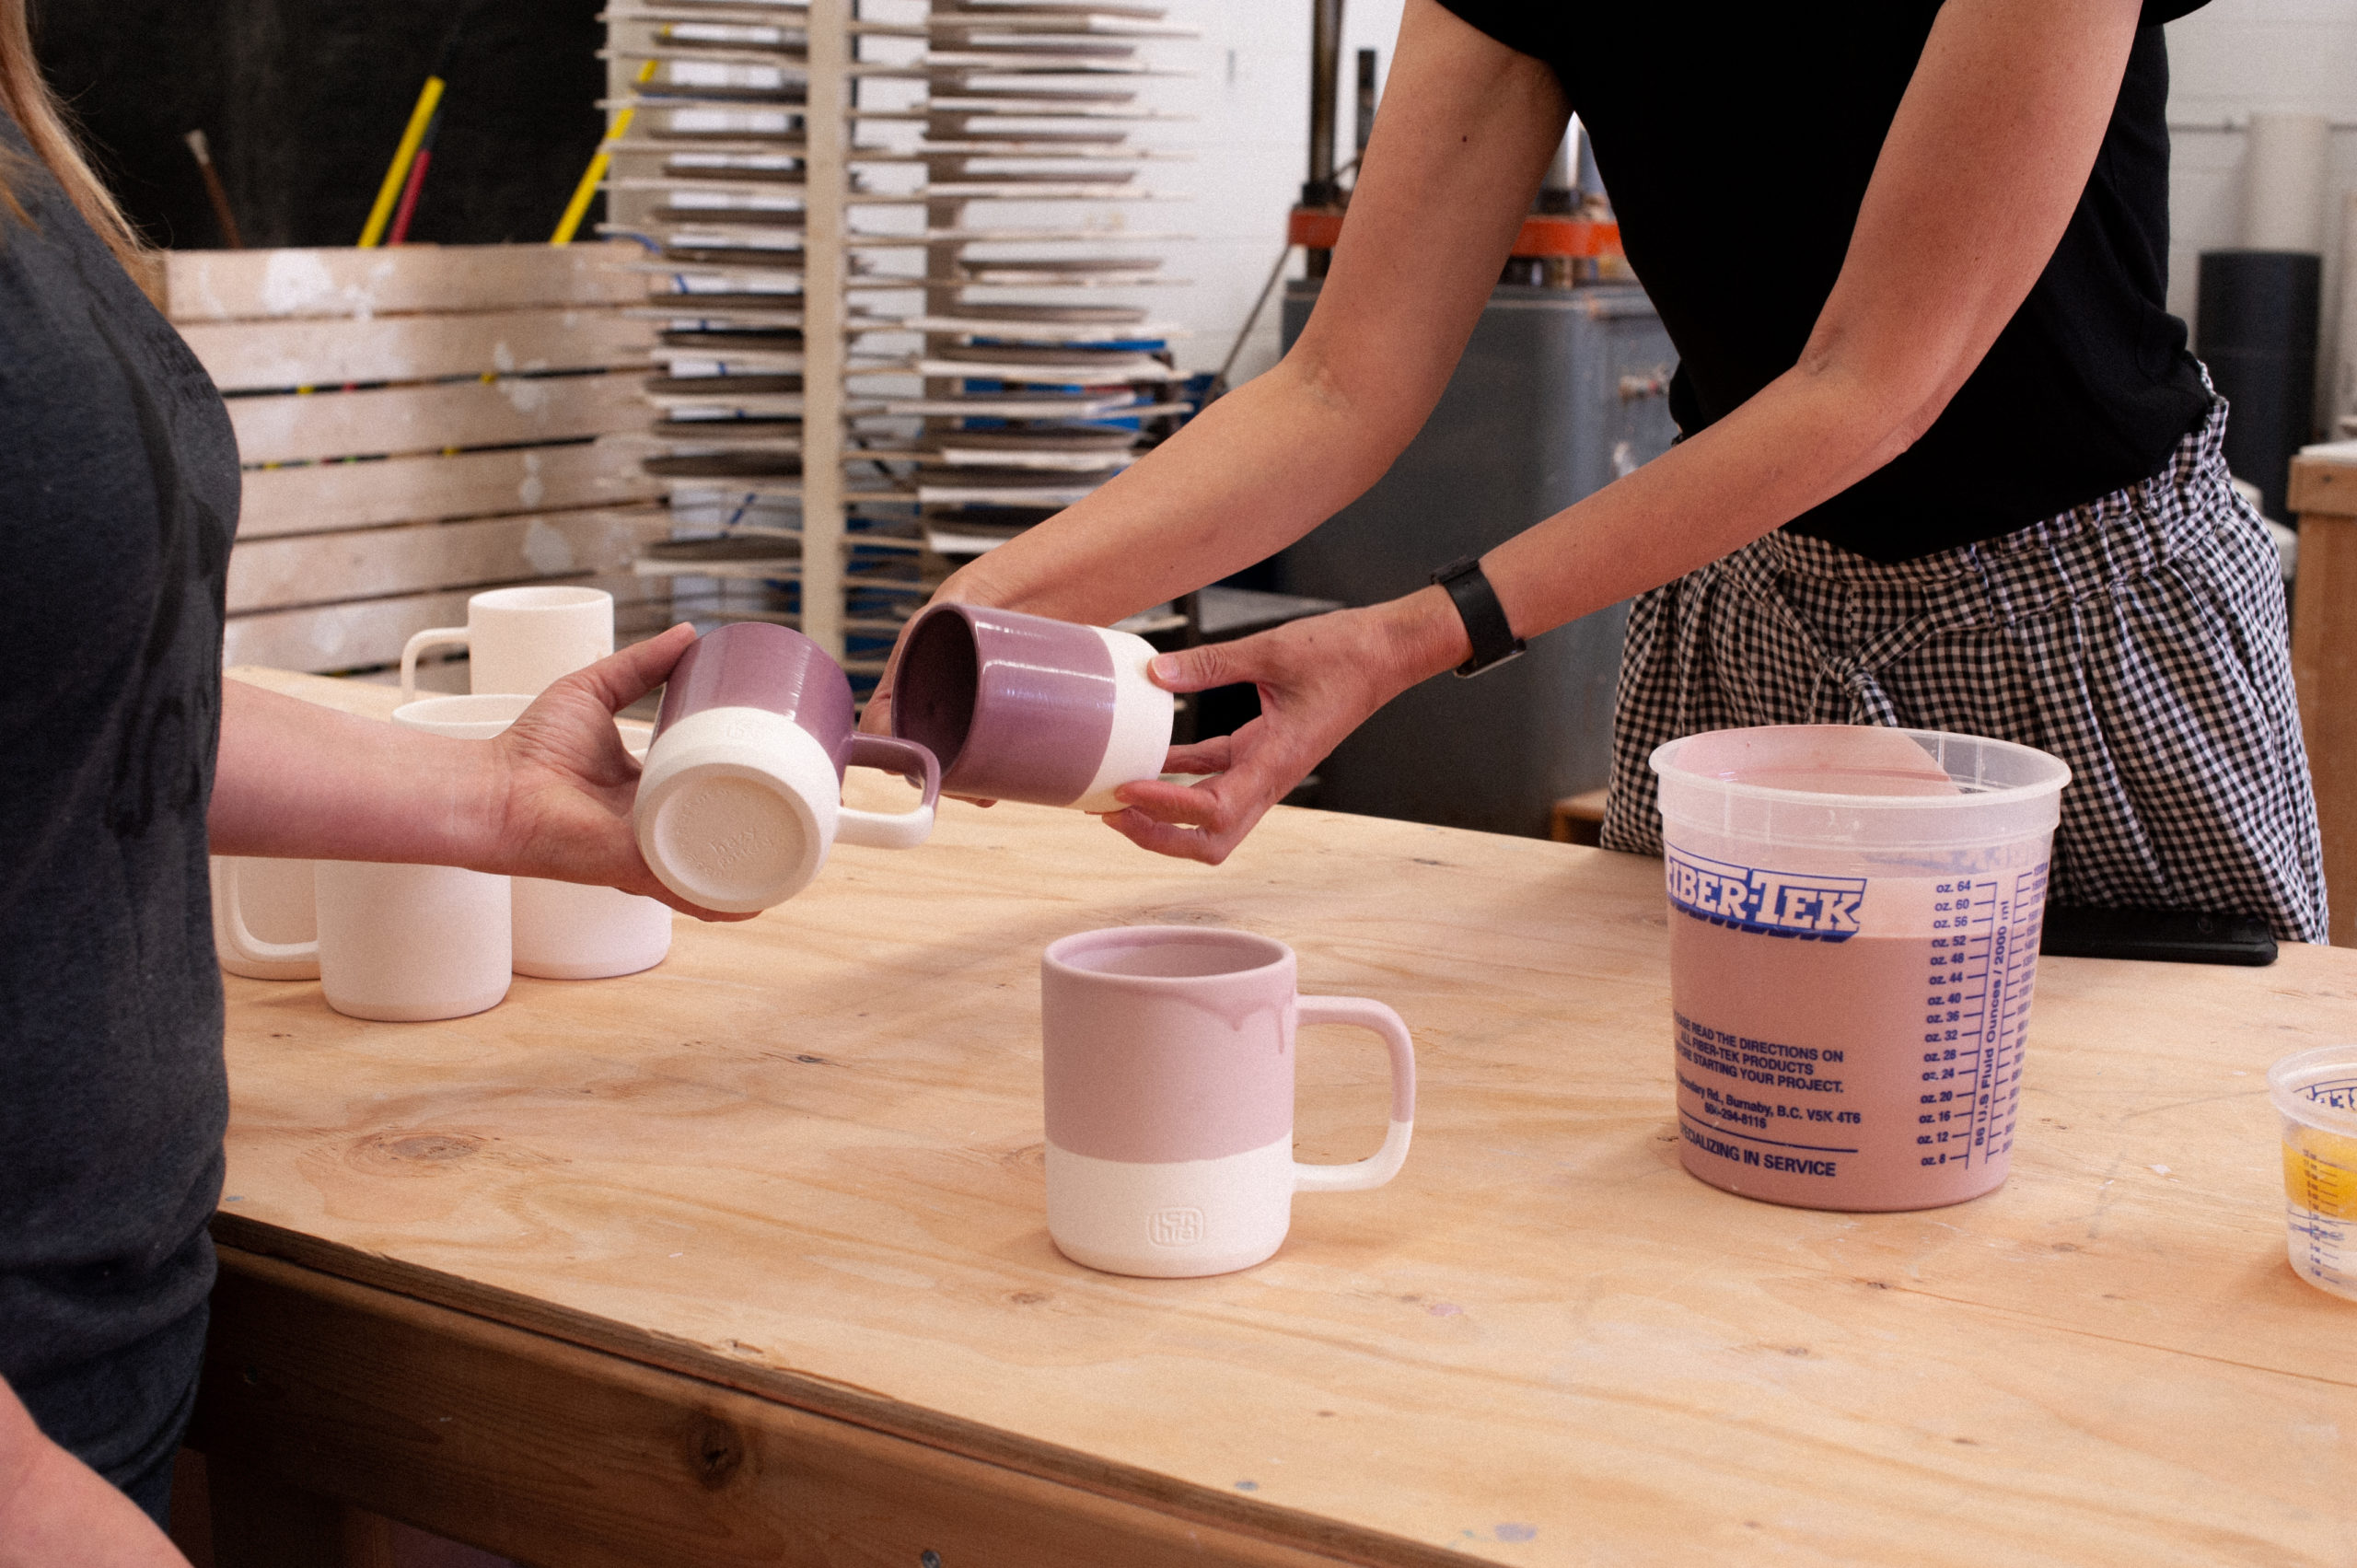 Mindy Doke and colleague holding HCMA mugs glazed in eggplant across a wooden workbench with a tub of glaze and unfired mugs scattered around.